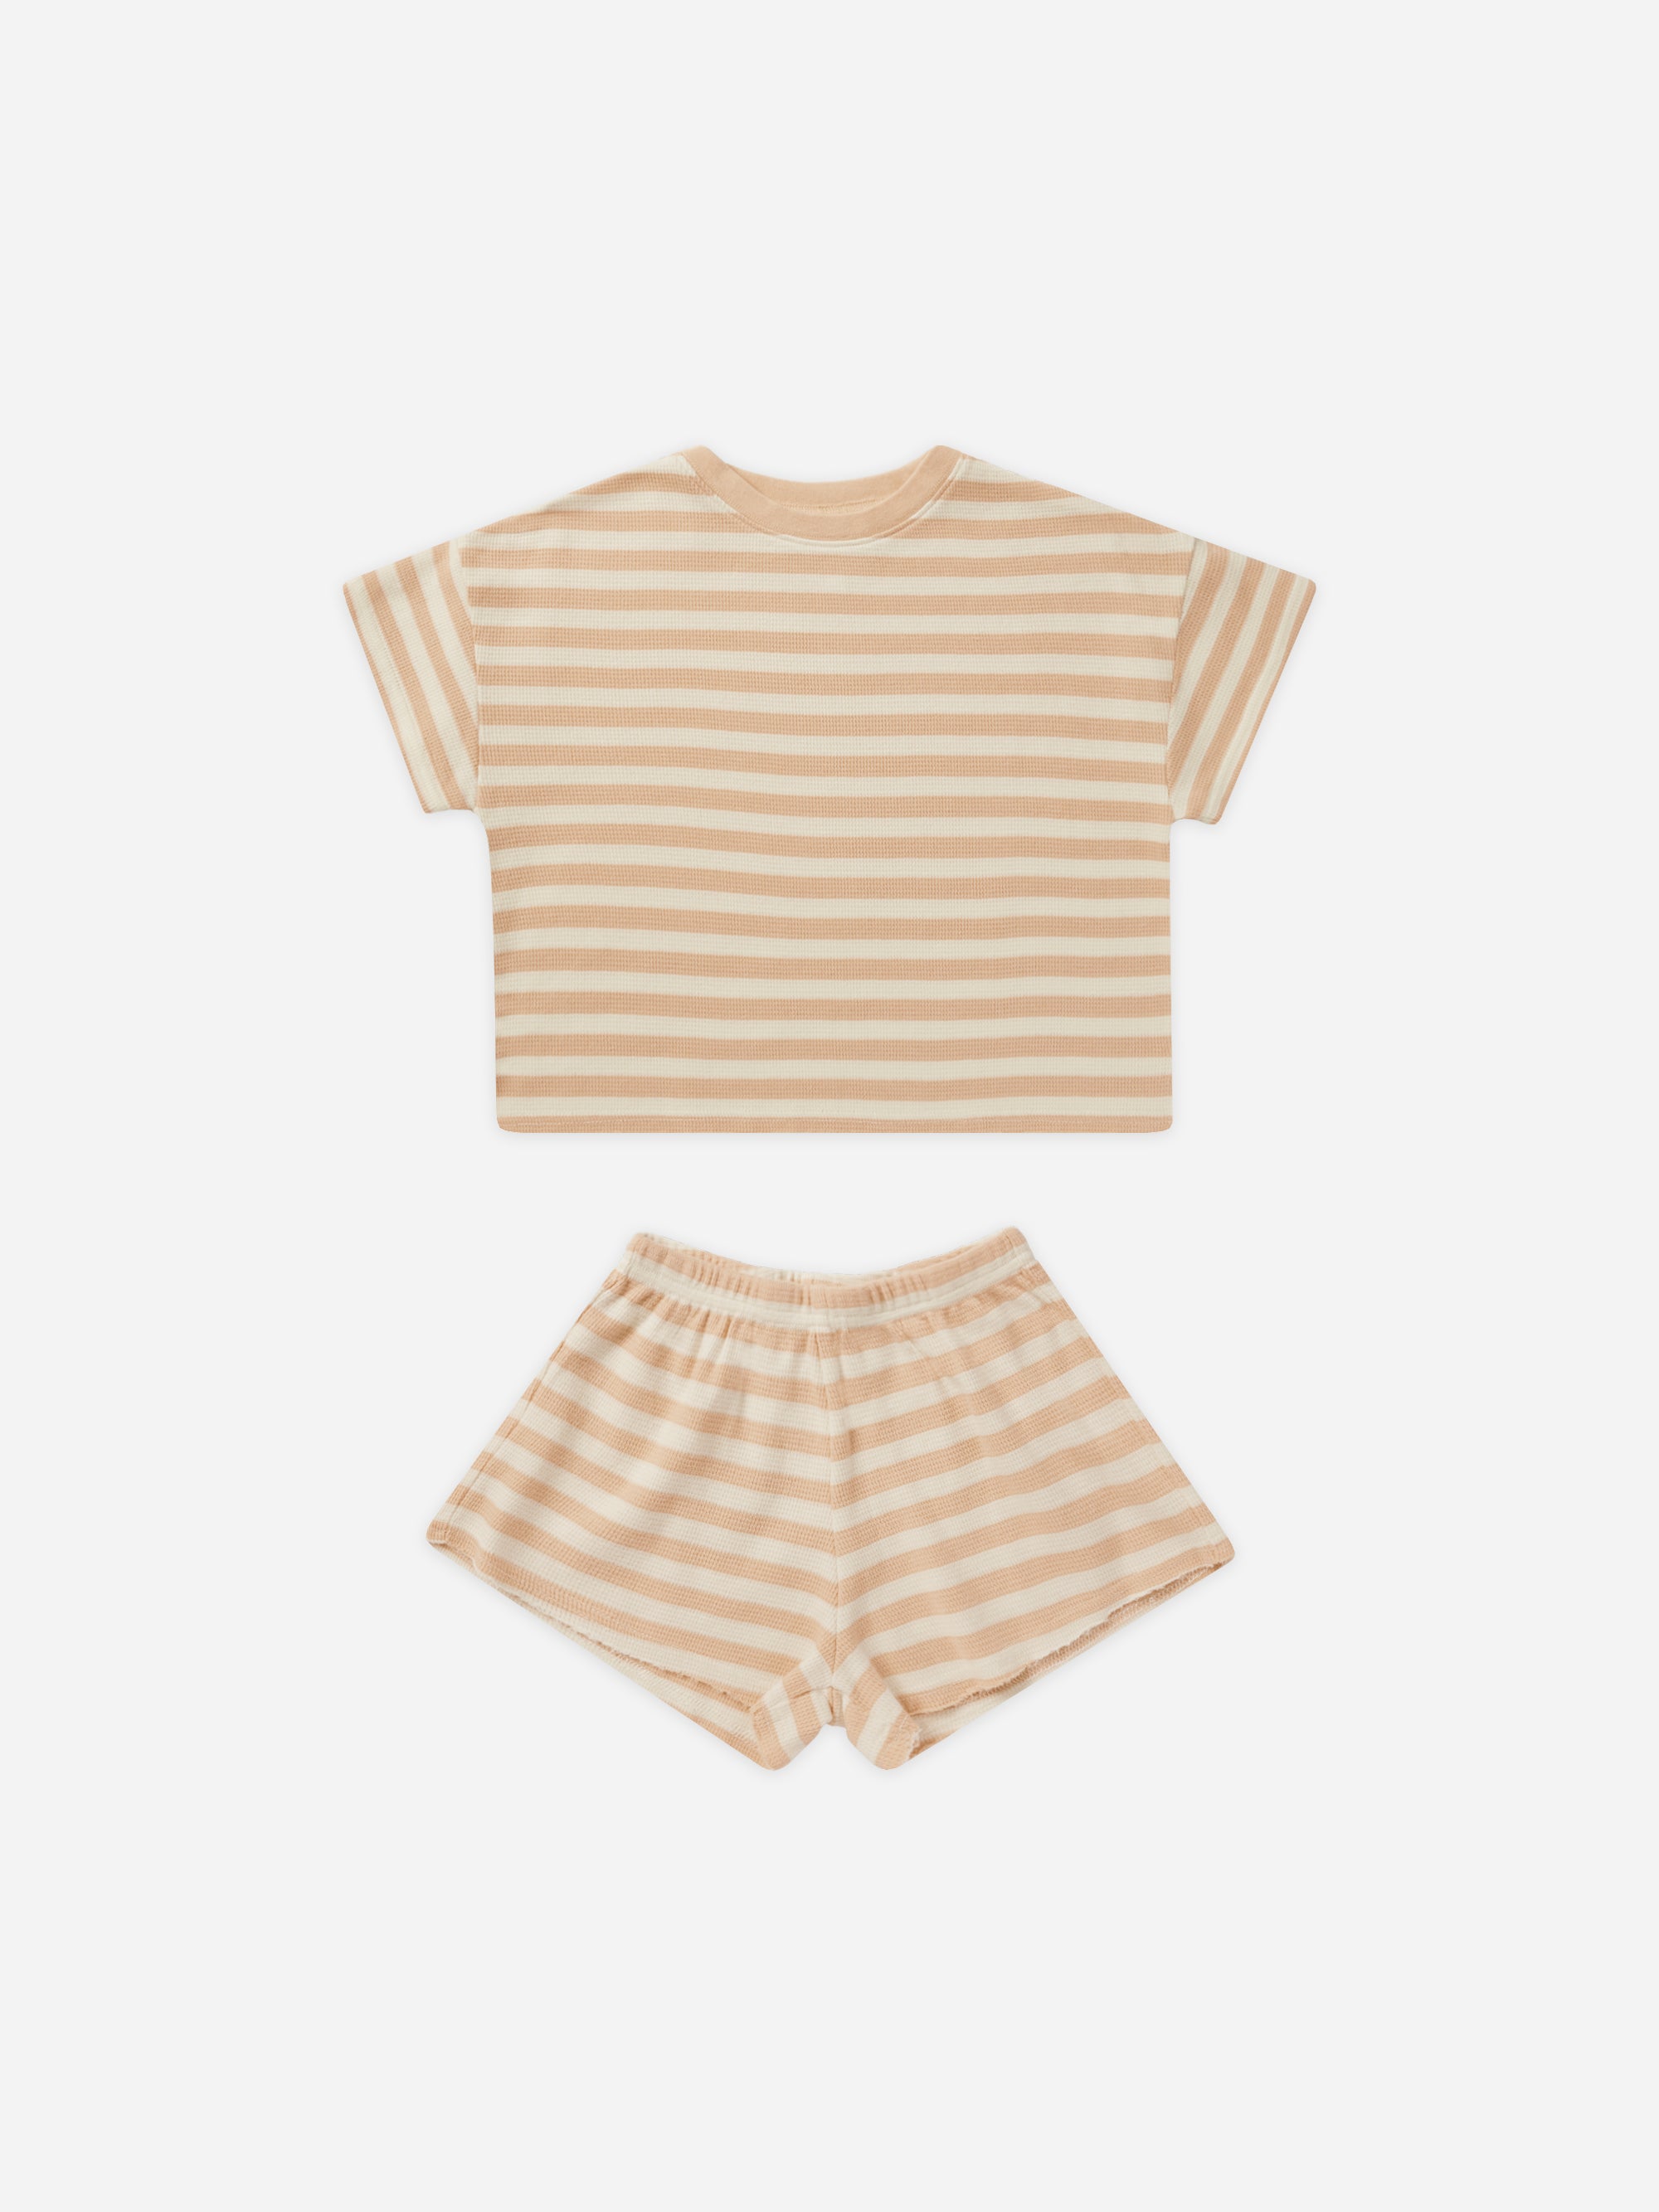 Summer Waffle Set || Apricot Stripe - Rylee + Cru | Kids Clothes | Trendy Baby Clothes | Modern Infant Outfits |